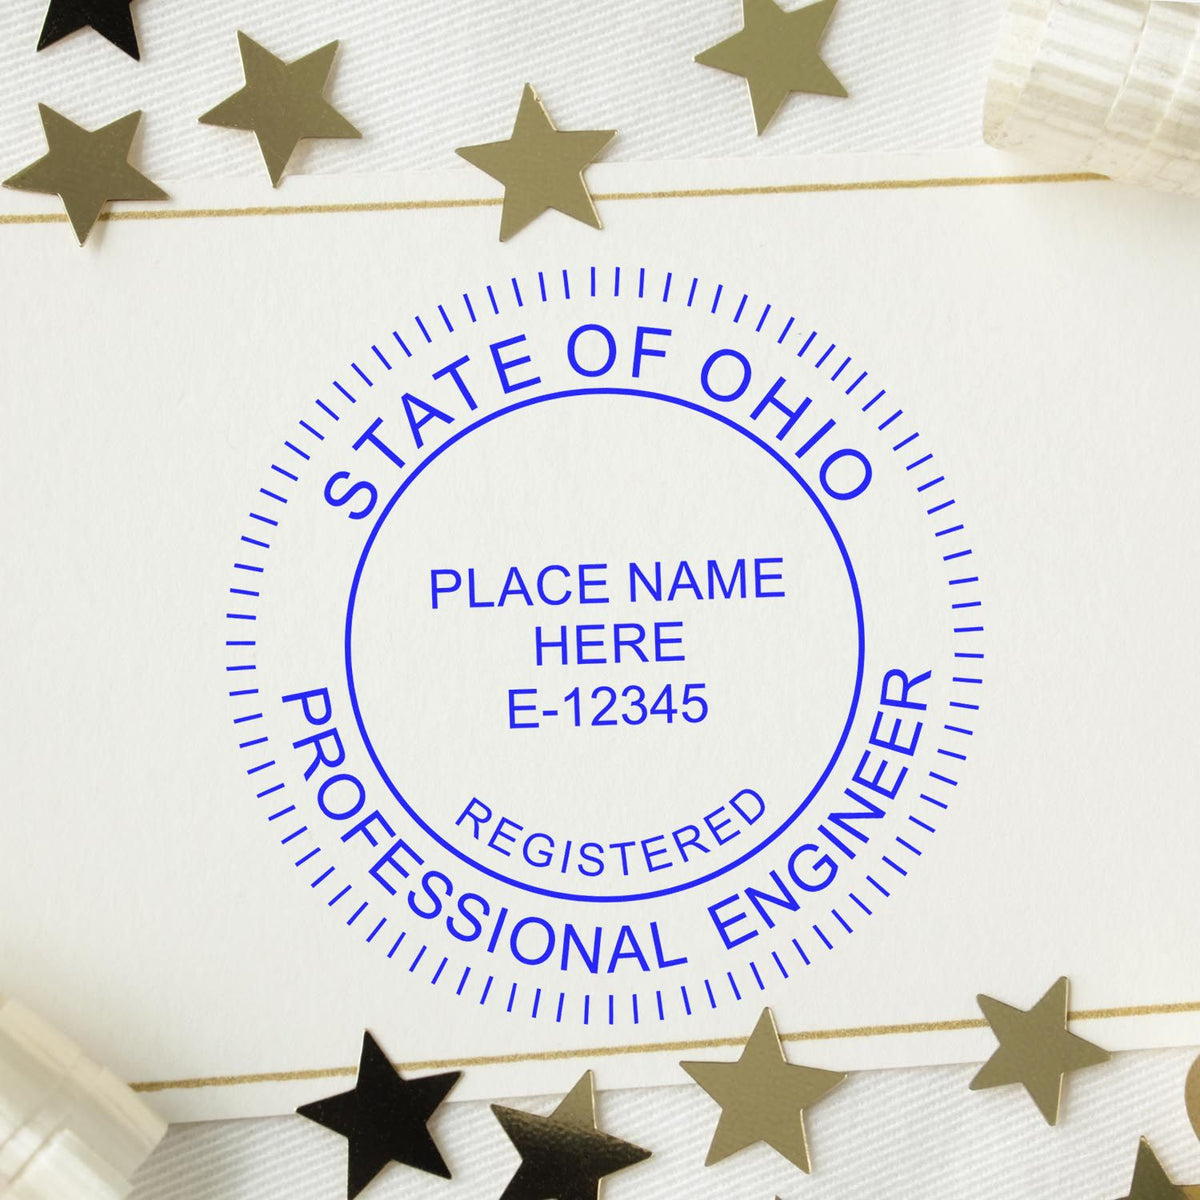 The Slim Pre-Inked Ohio Professional Engineer Seal Stamp stamp impression comes to life with a crisp, detailed photo on paper - showcasing true professional quality.